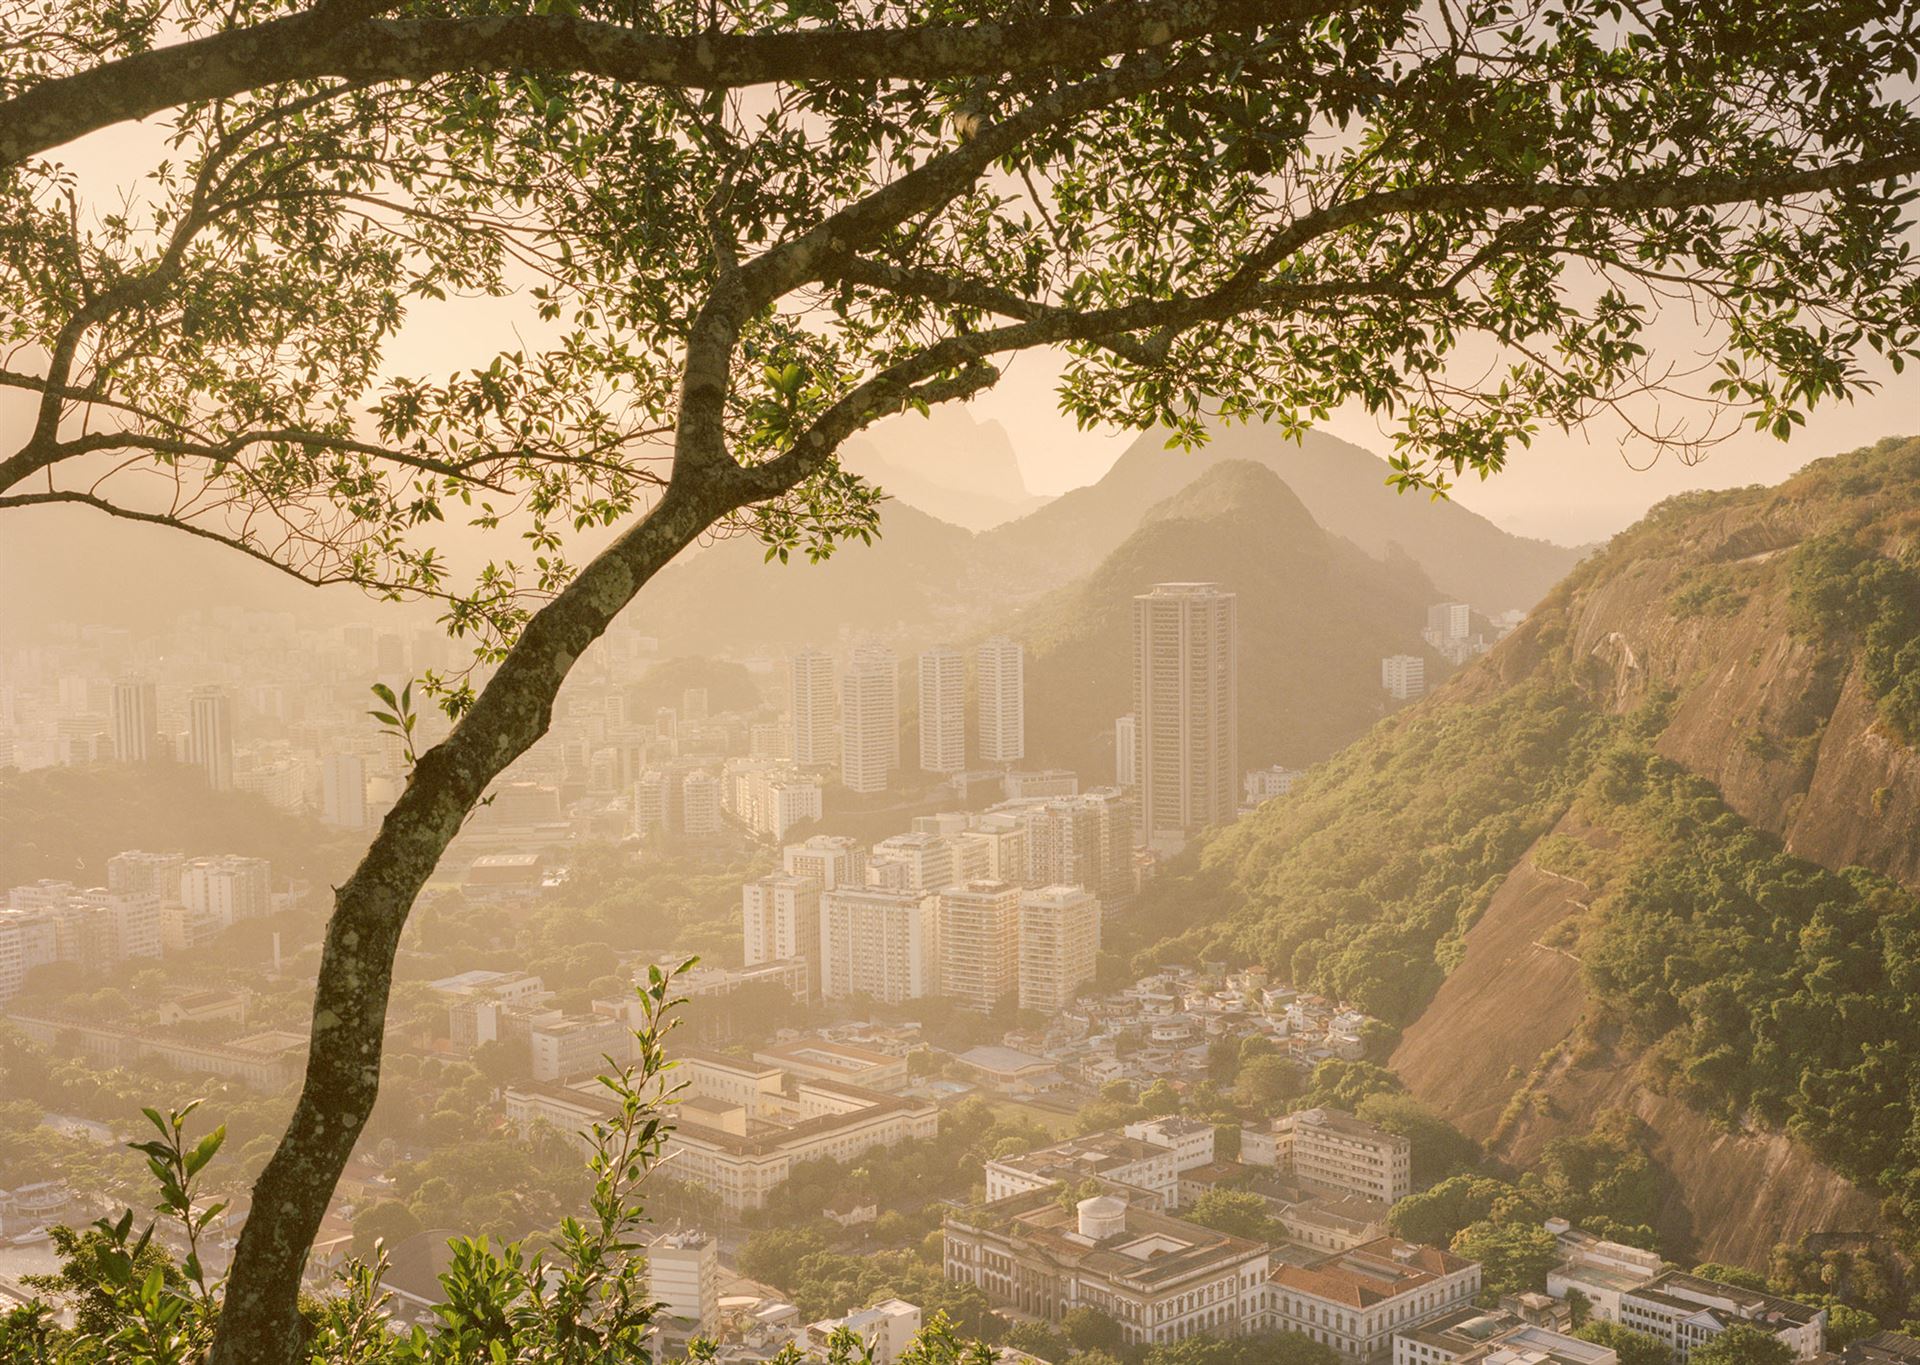 <div>Gaia Squarci, <i>Flamengo is an upper-middle-class neighborhood in Rio de Janeiro, characterized by relatively low temperatures thanks to its proximity to the Tijuca National Park. Brazil</i>, 2022 - Humidity 67%, 25°C</div><div>© Gaia Squarci</div><div><br></div>